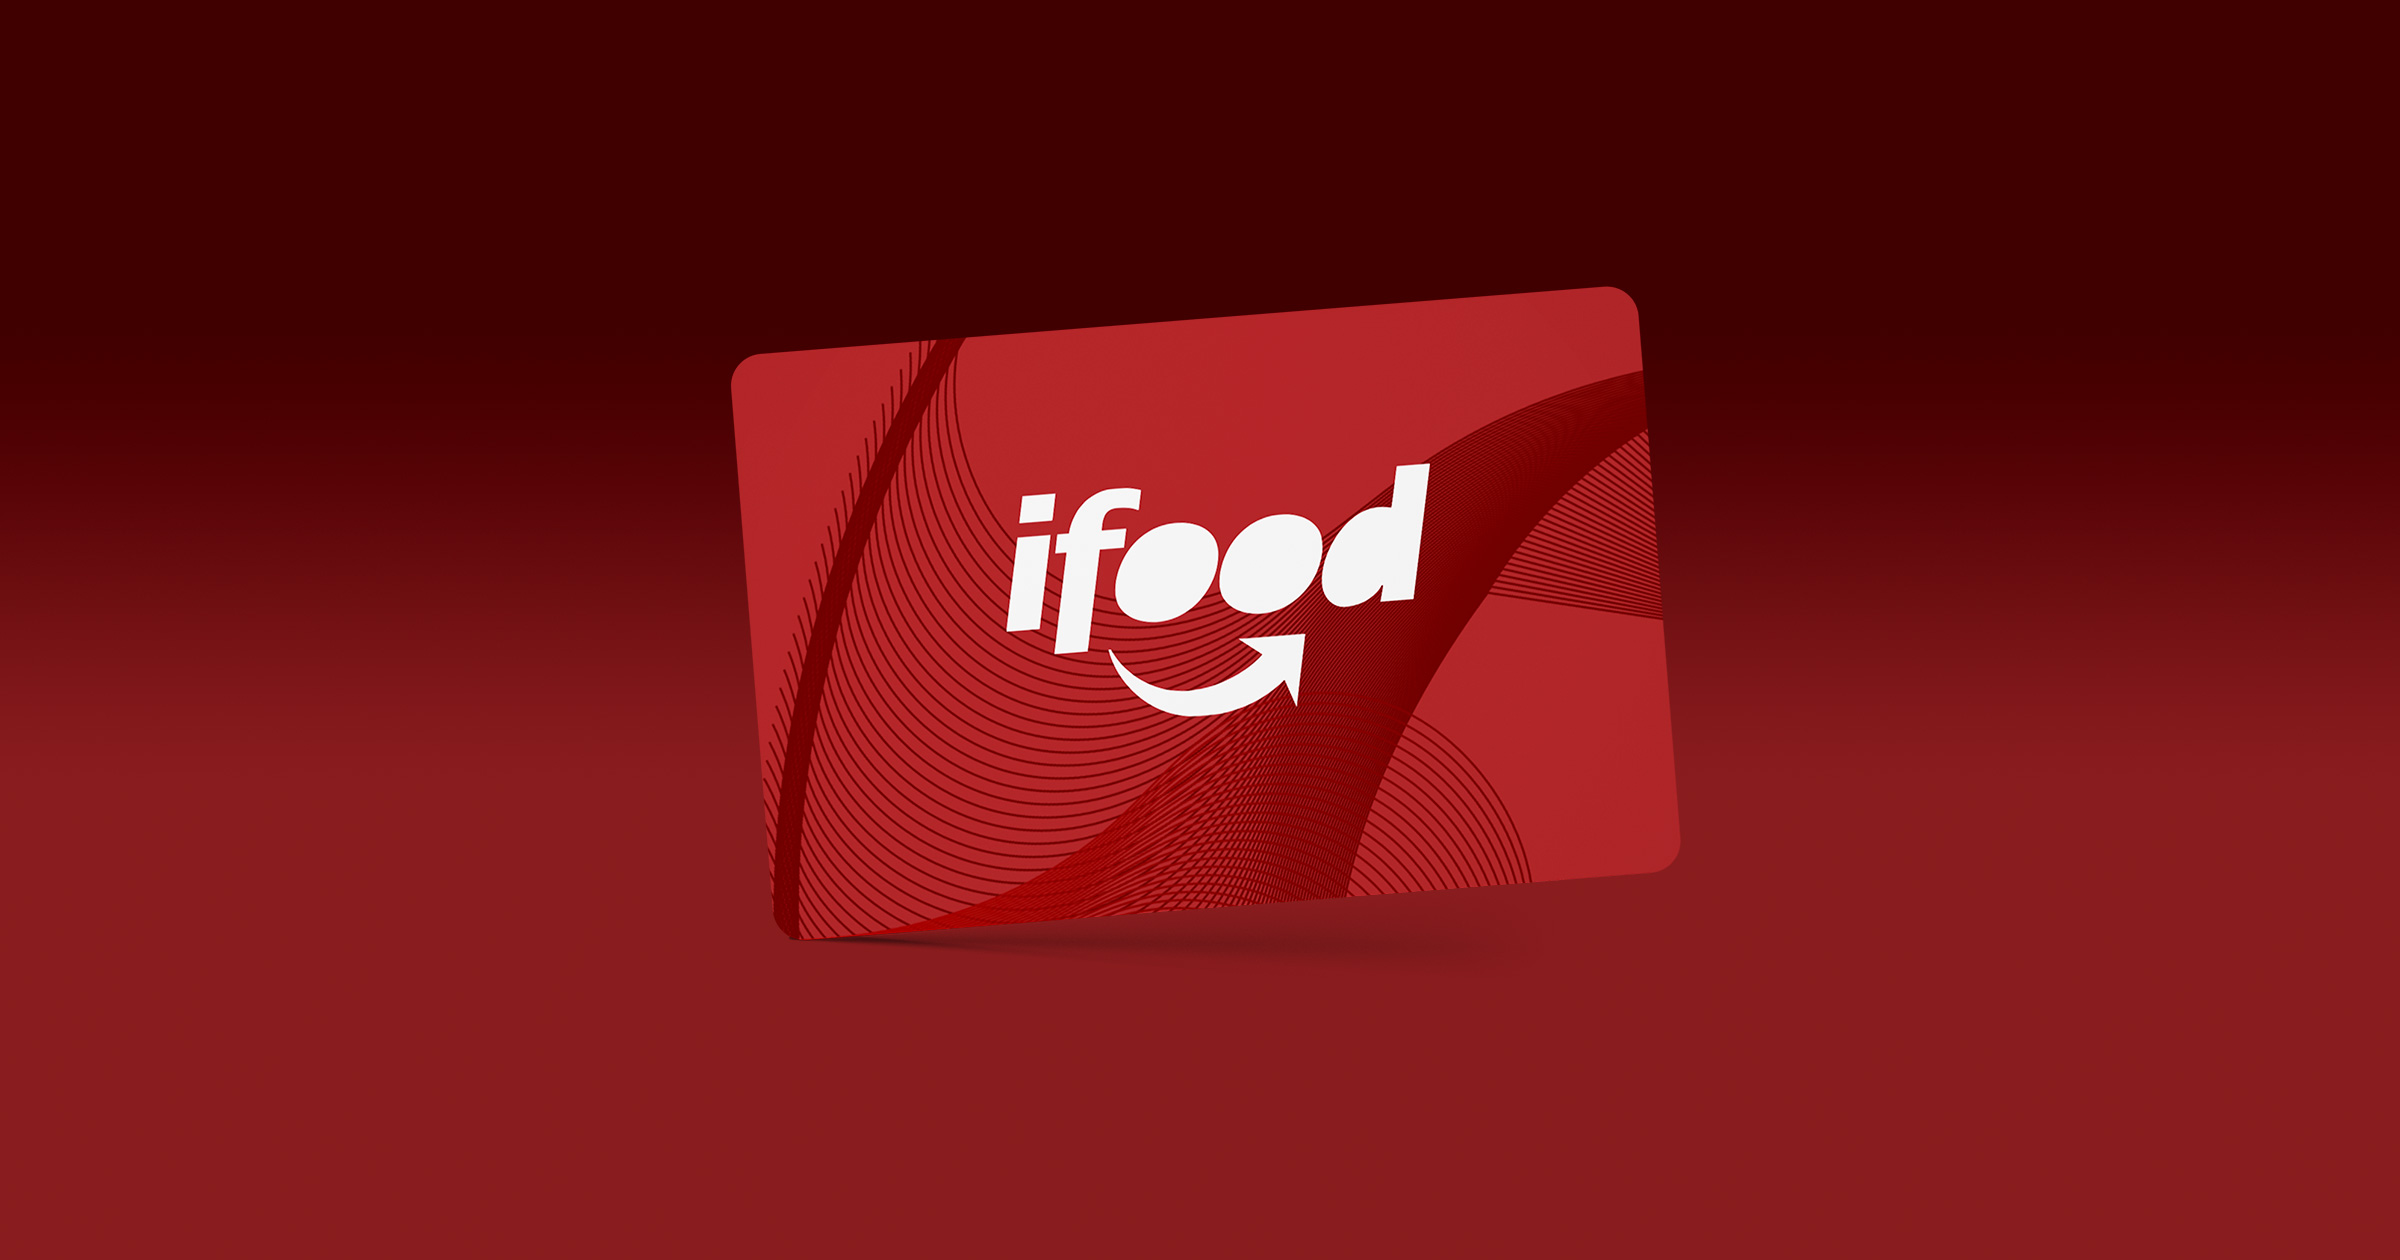 IFood BRL 30 Gift Card BR